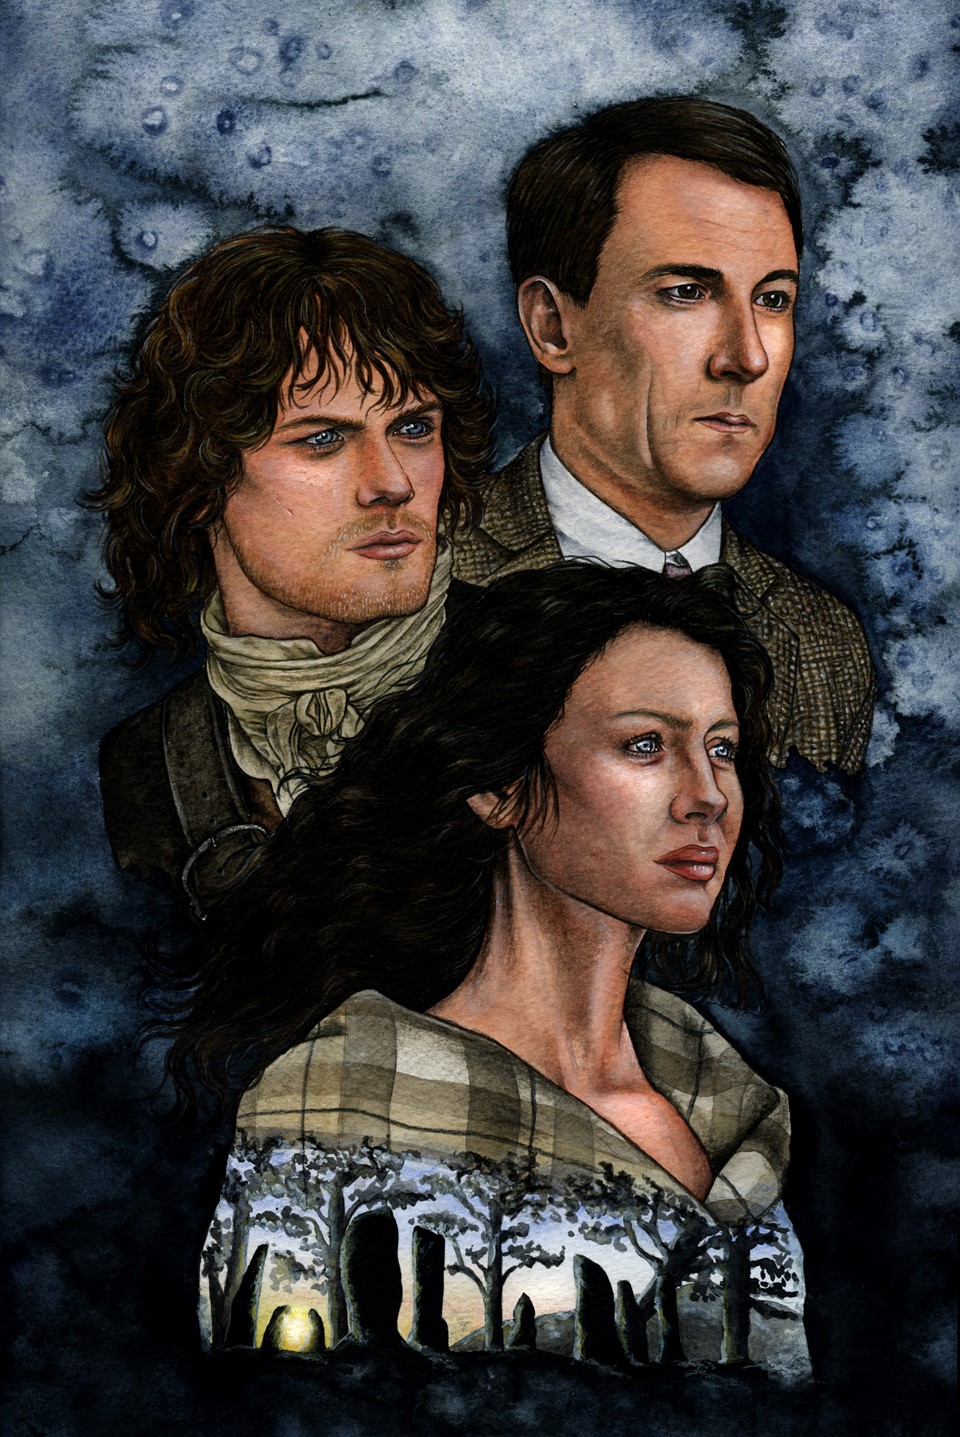 Https Wwwillustrationbyhollycouk Portfolio Fantasy And Famous Faces Mixed Media Watercolour Fan Art Painting Of Outlander Tv Series Characters